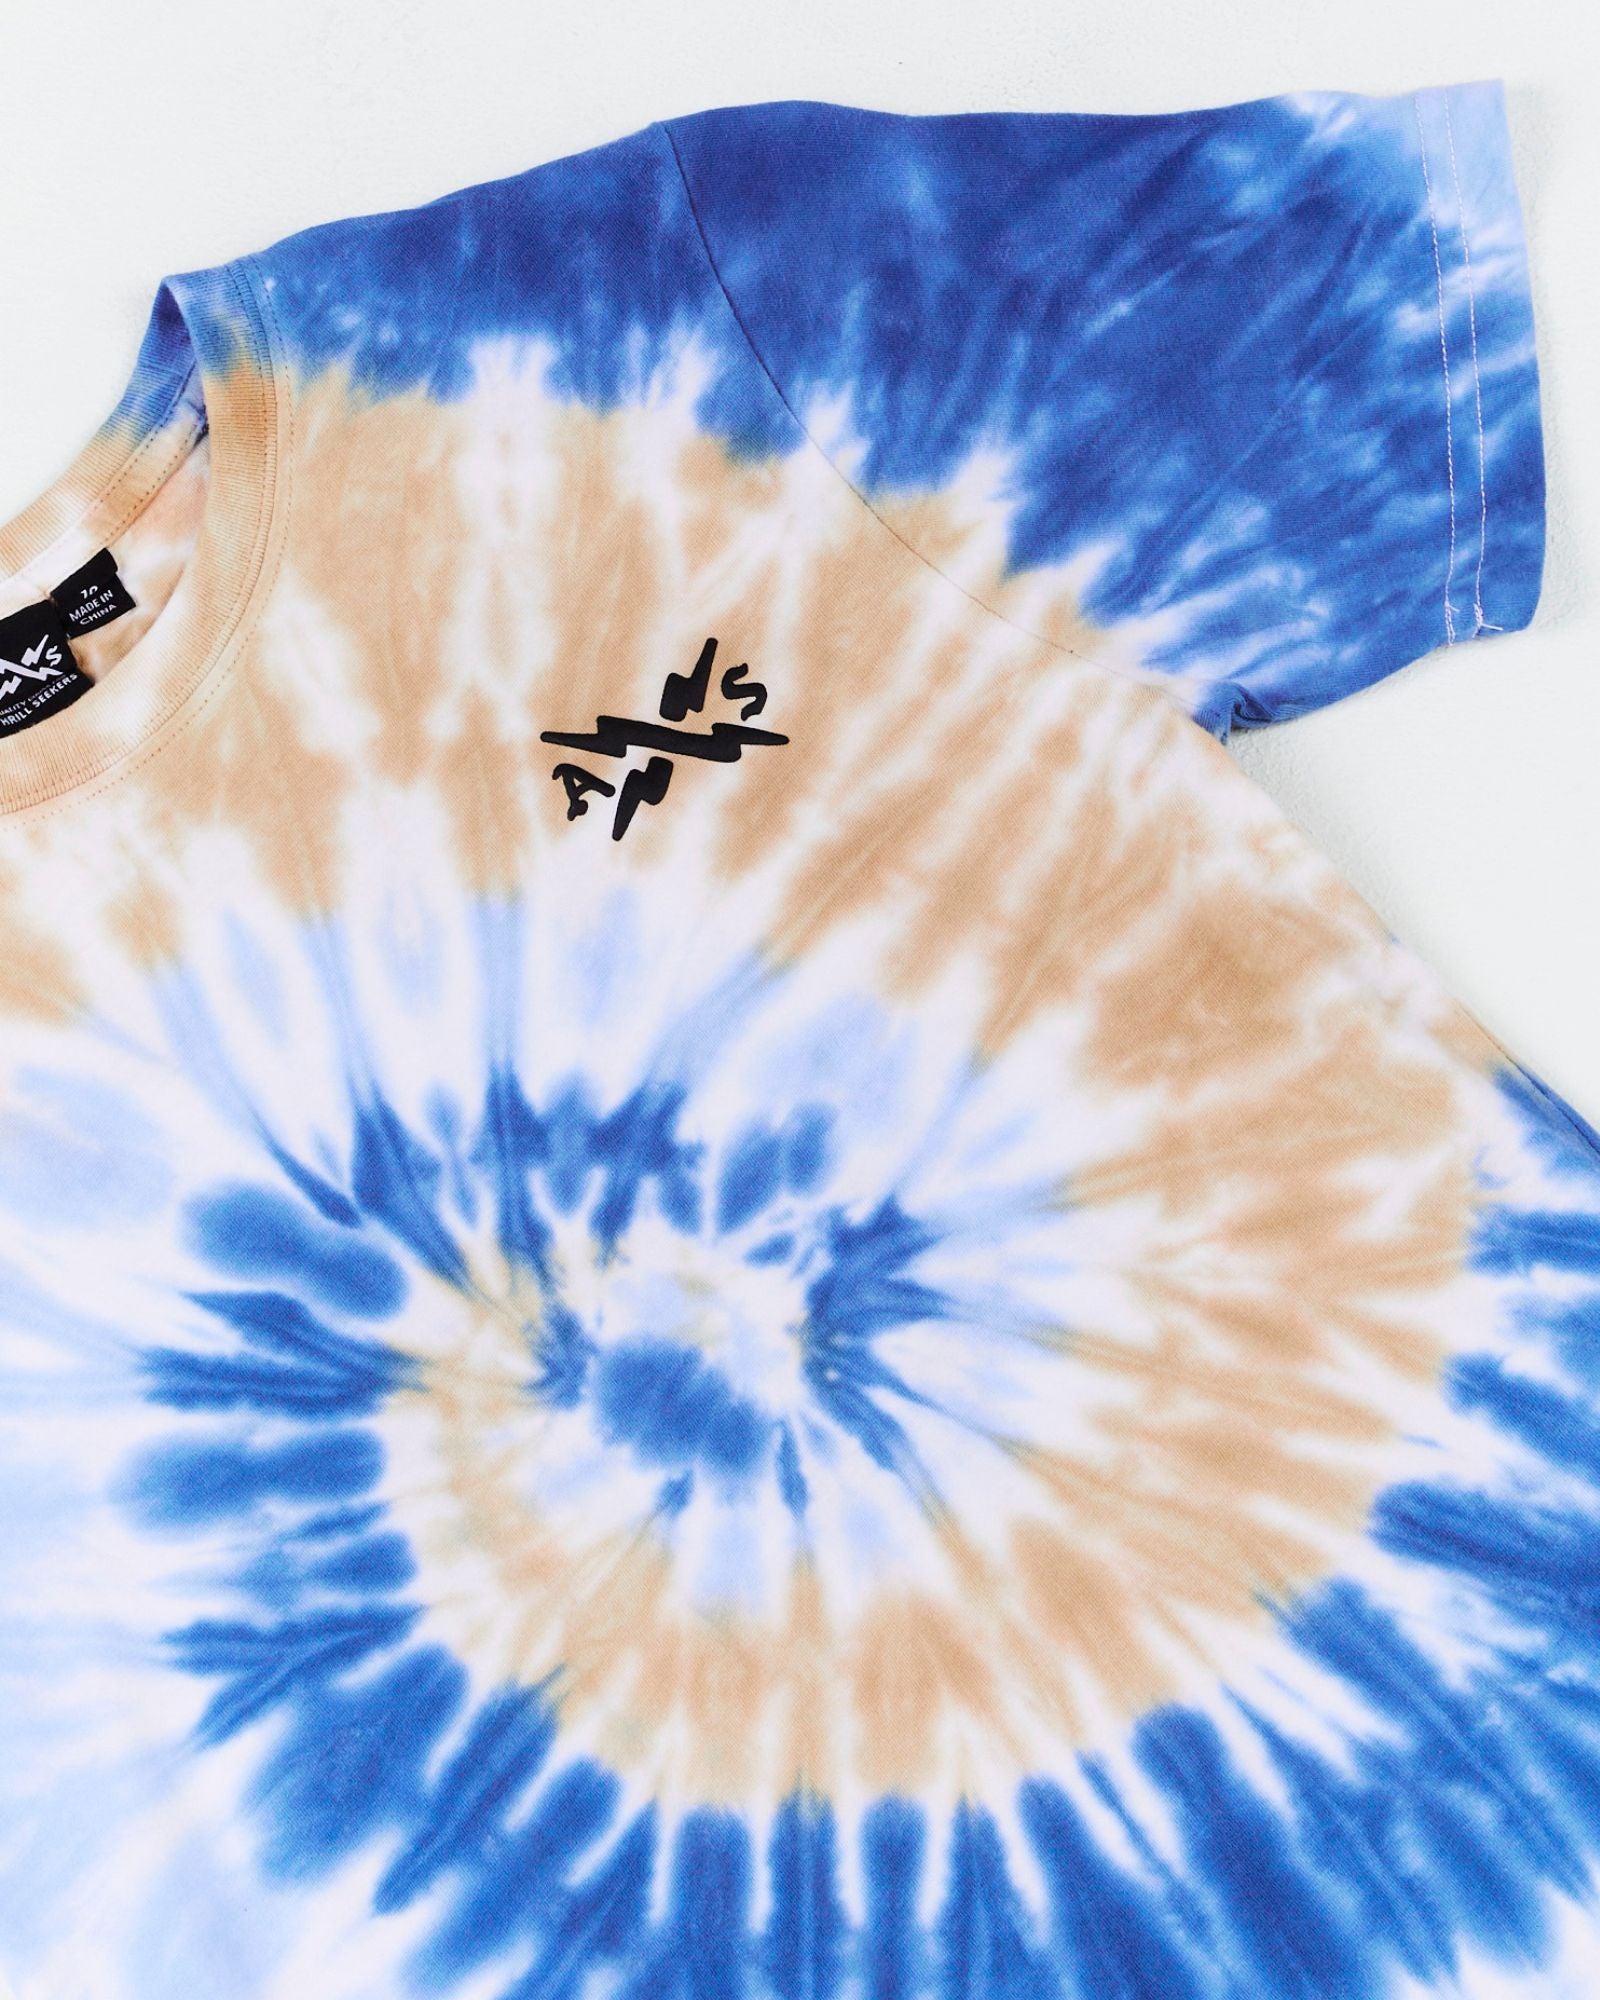 Alphabet Soup's Kids Dunked Tee for boys aged 8 to 16. Crafted in bright blue swirl tie dye & 100% cotton jersey for comfort. Features regular fit, straight hemline, short sleeves, ribbed crew neckline & puff print on chest. 